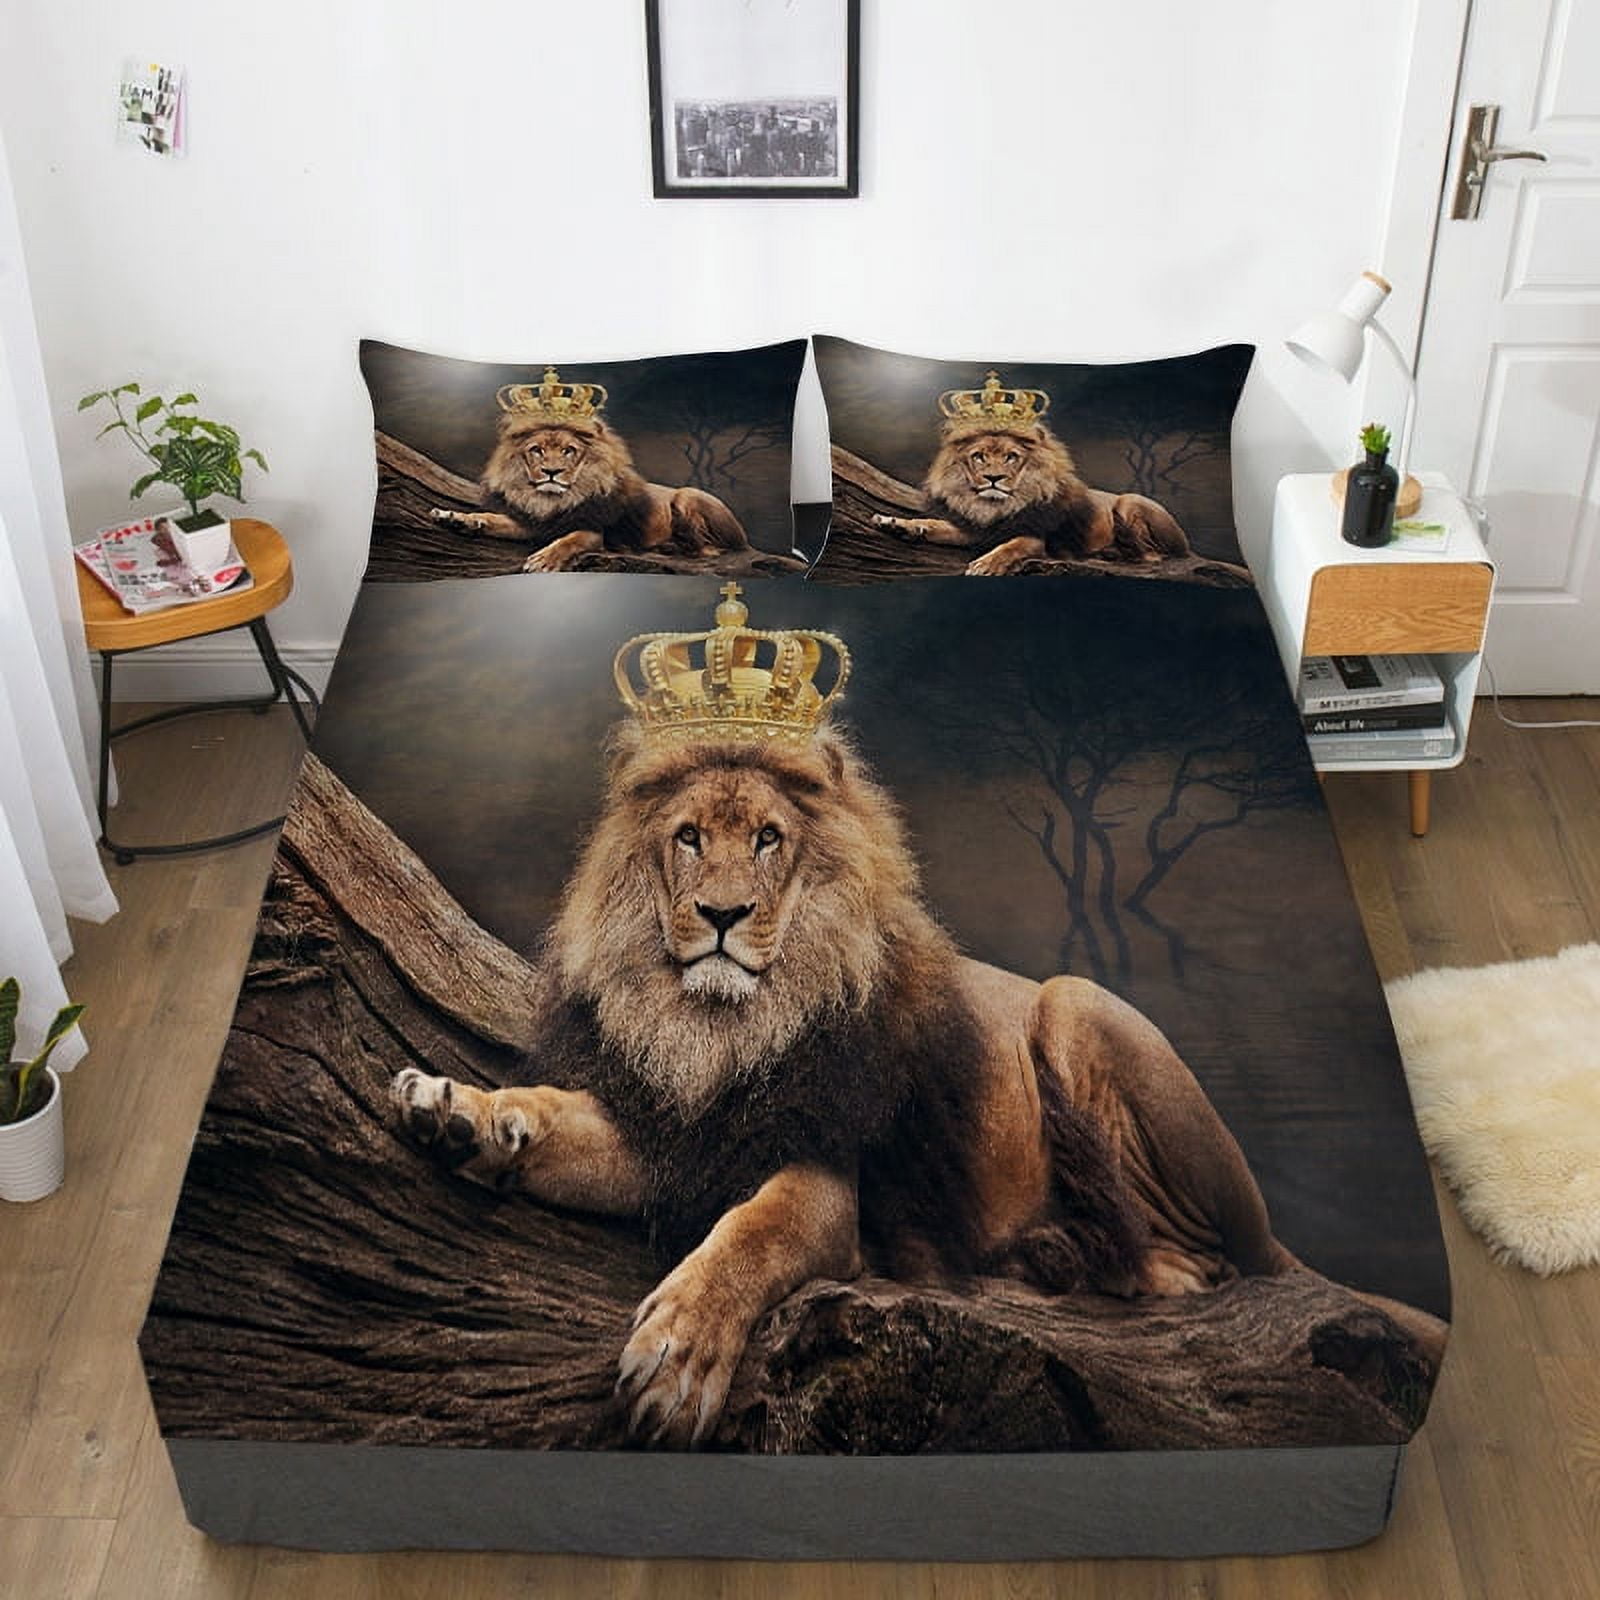 Lion Bed Sheet Animals Bedding Cover Set Home Textiles Fitted